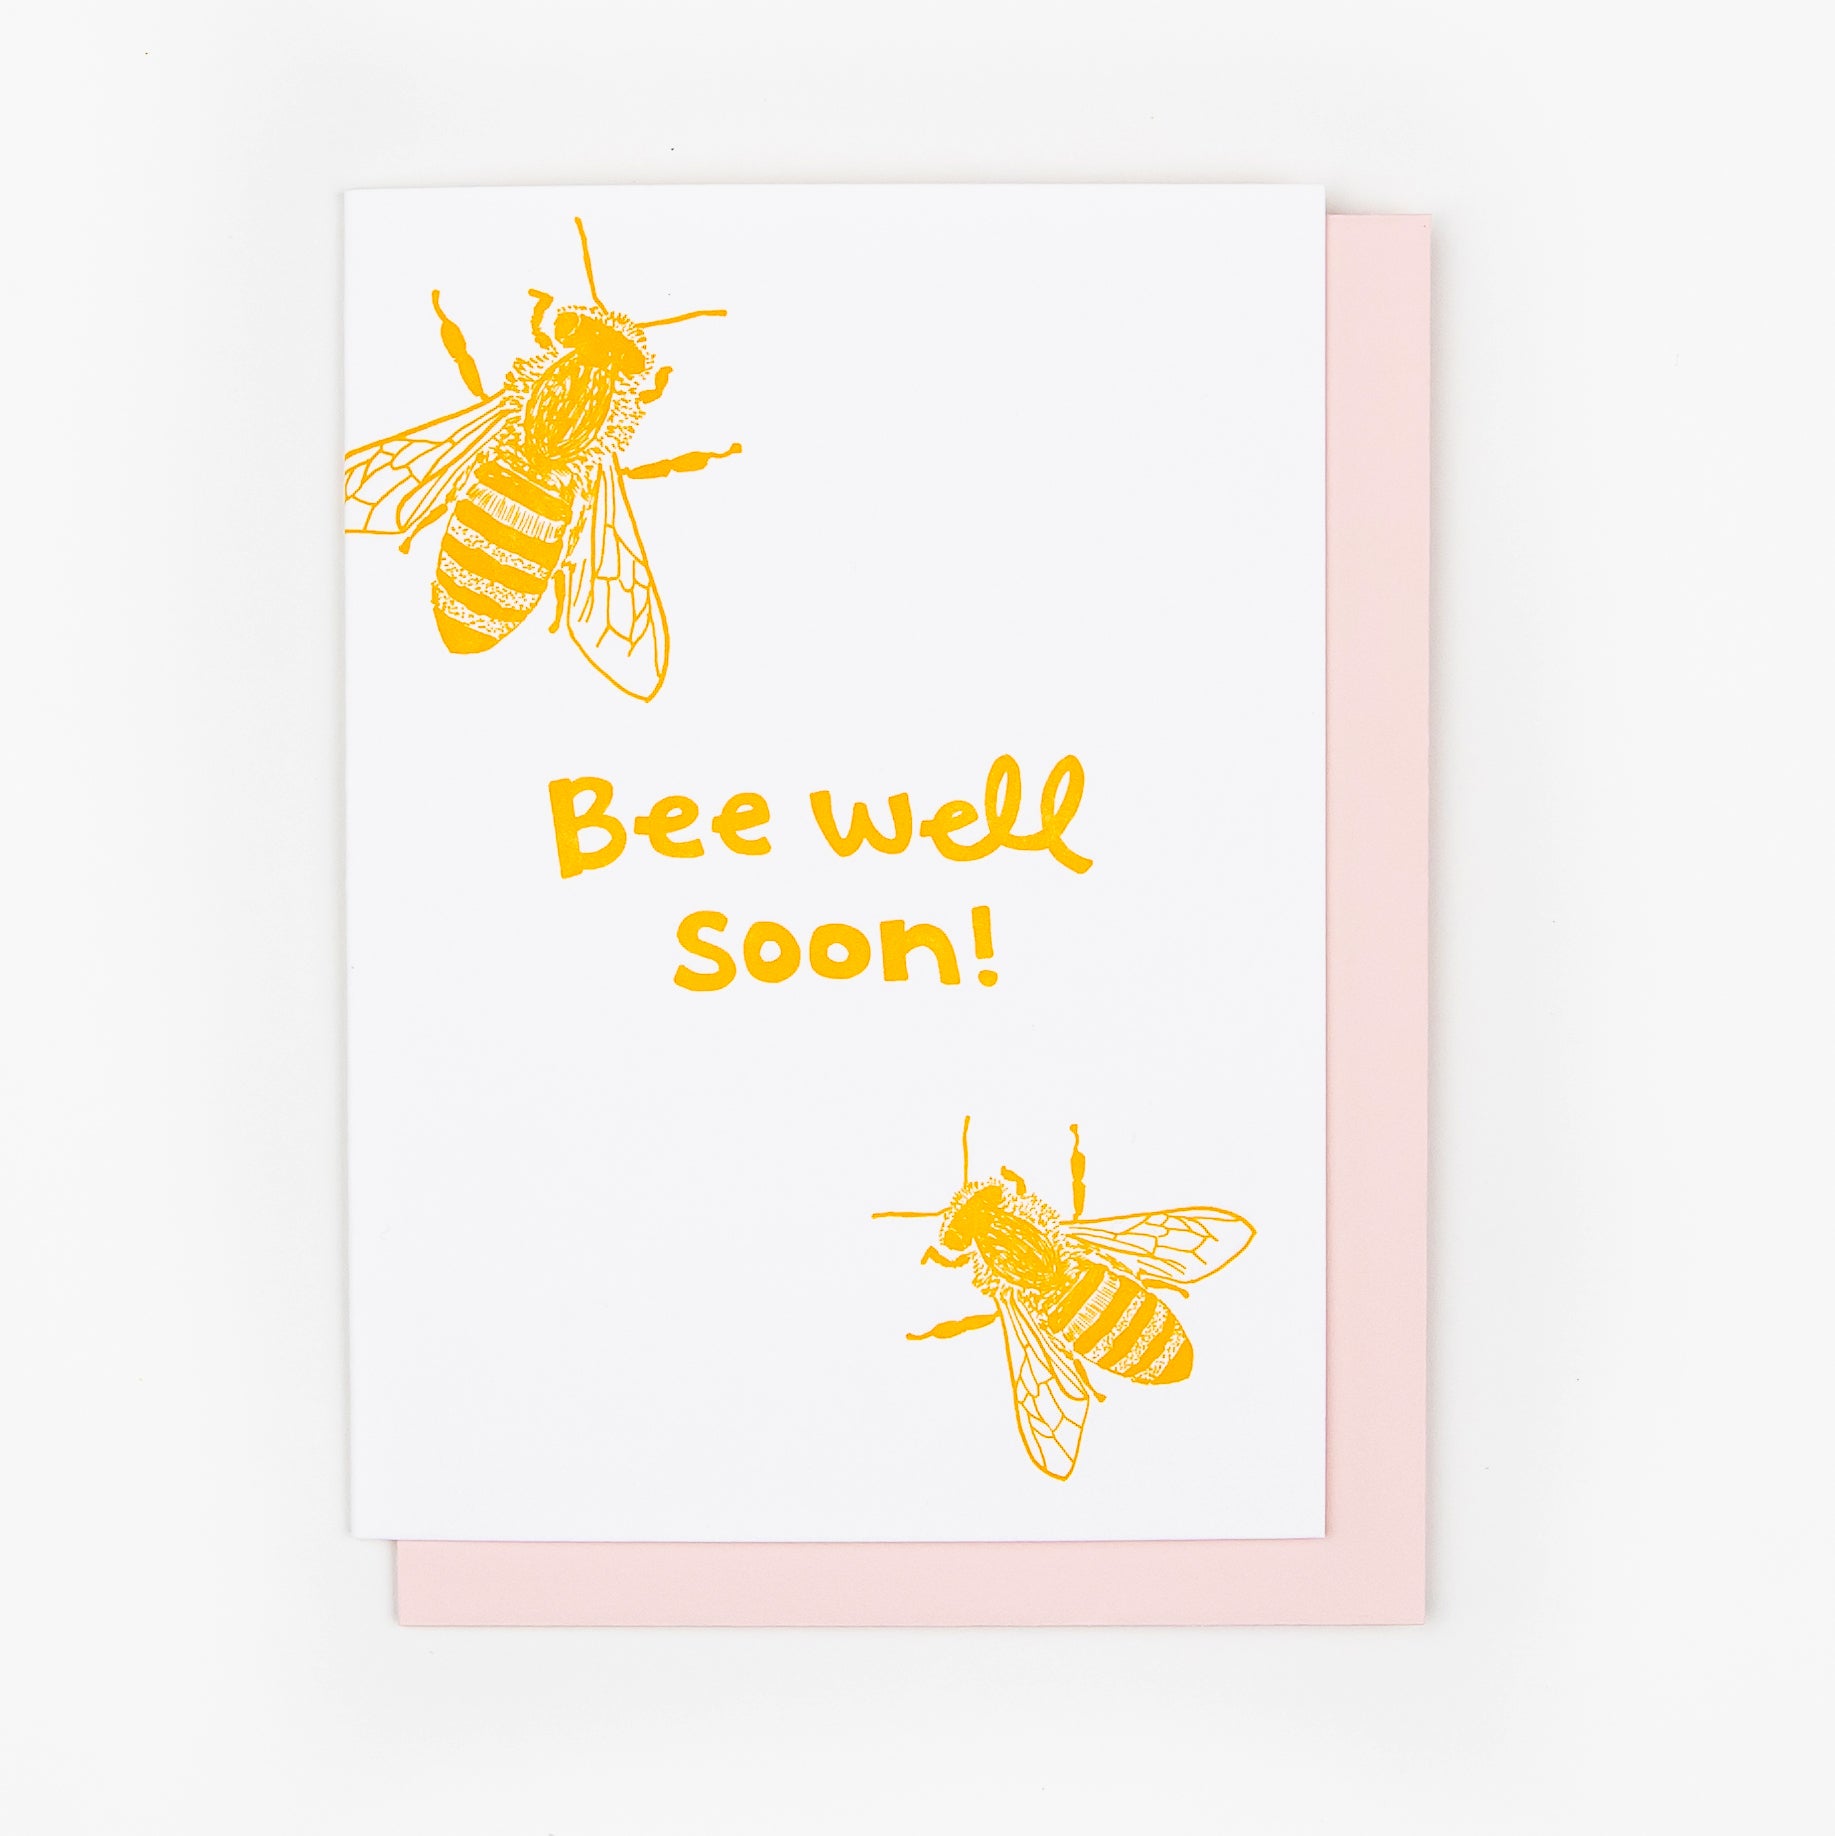 Letterpress greeting card featuring two hand-drawn honeybees, printed in a vibrant golden ink. Whimsical hand-drawn text saying "Bee Well Soon" is shown in the center of the card, in the same golden ink. The card is white, blank inside, and is paired with a pink envelope.